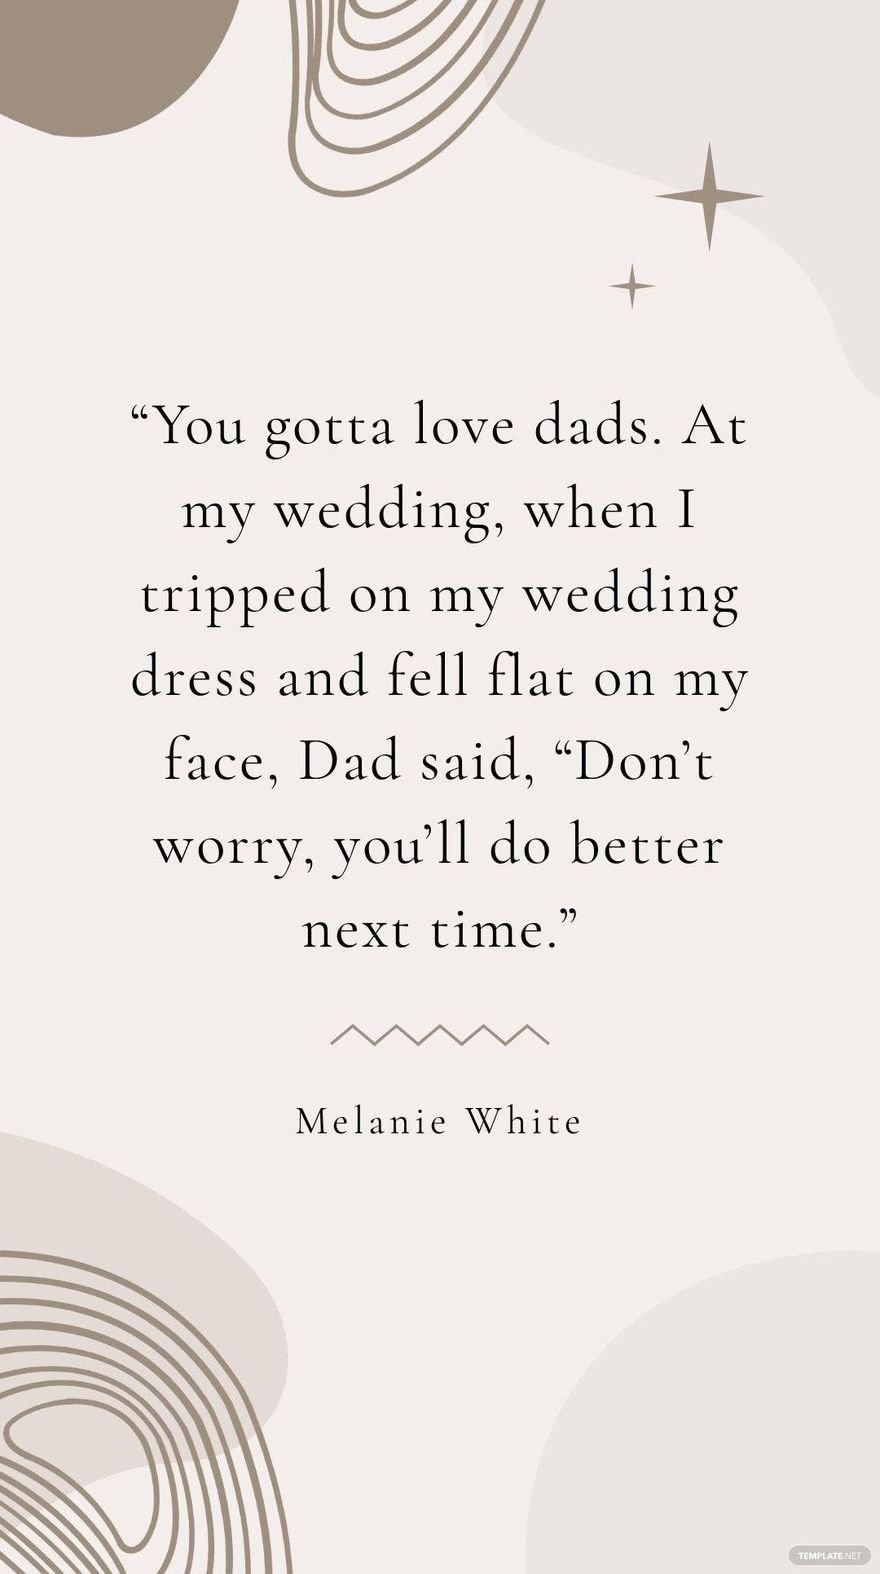 Free Melanie White - “You gotta love dads. At my wedding, when I tripped on my wedding dress and fell flat on my face, Dad said, “Don’t worry, you’ll do better next time.” in JPG